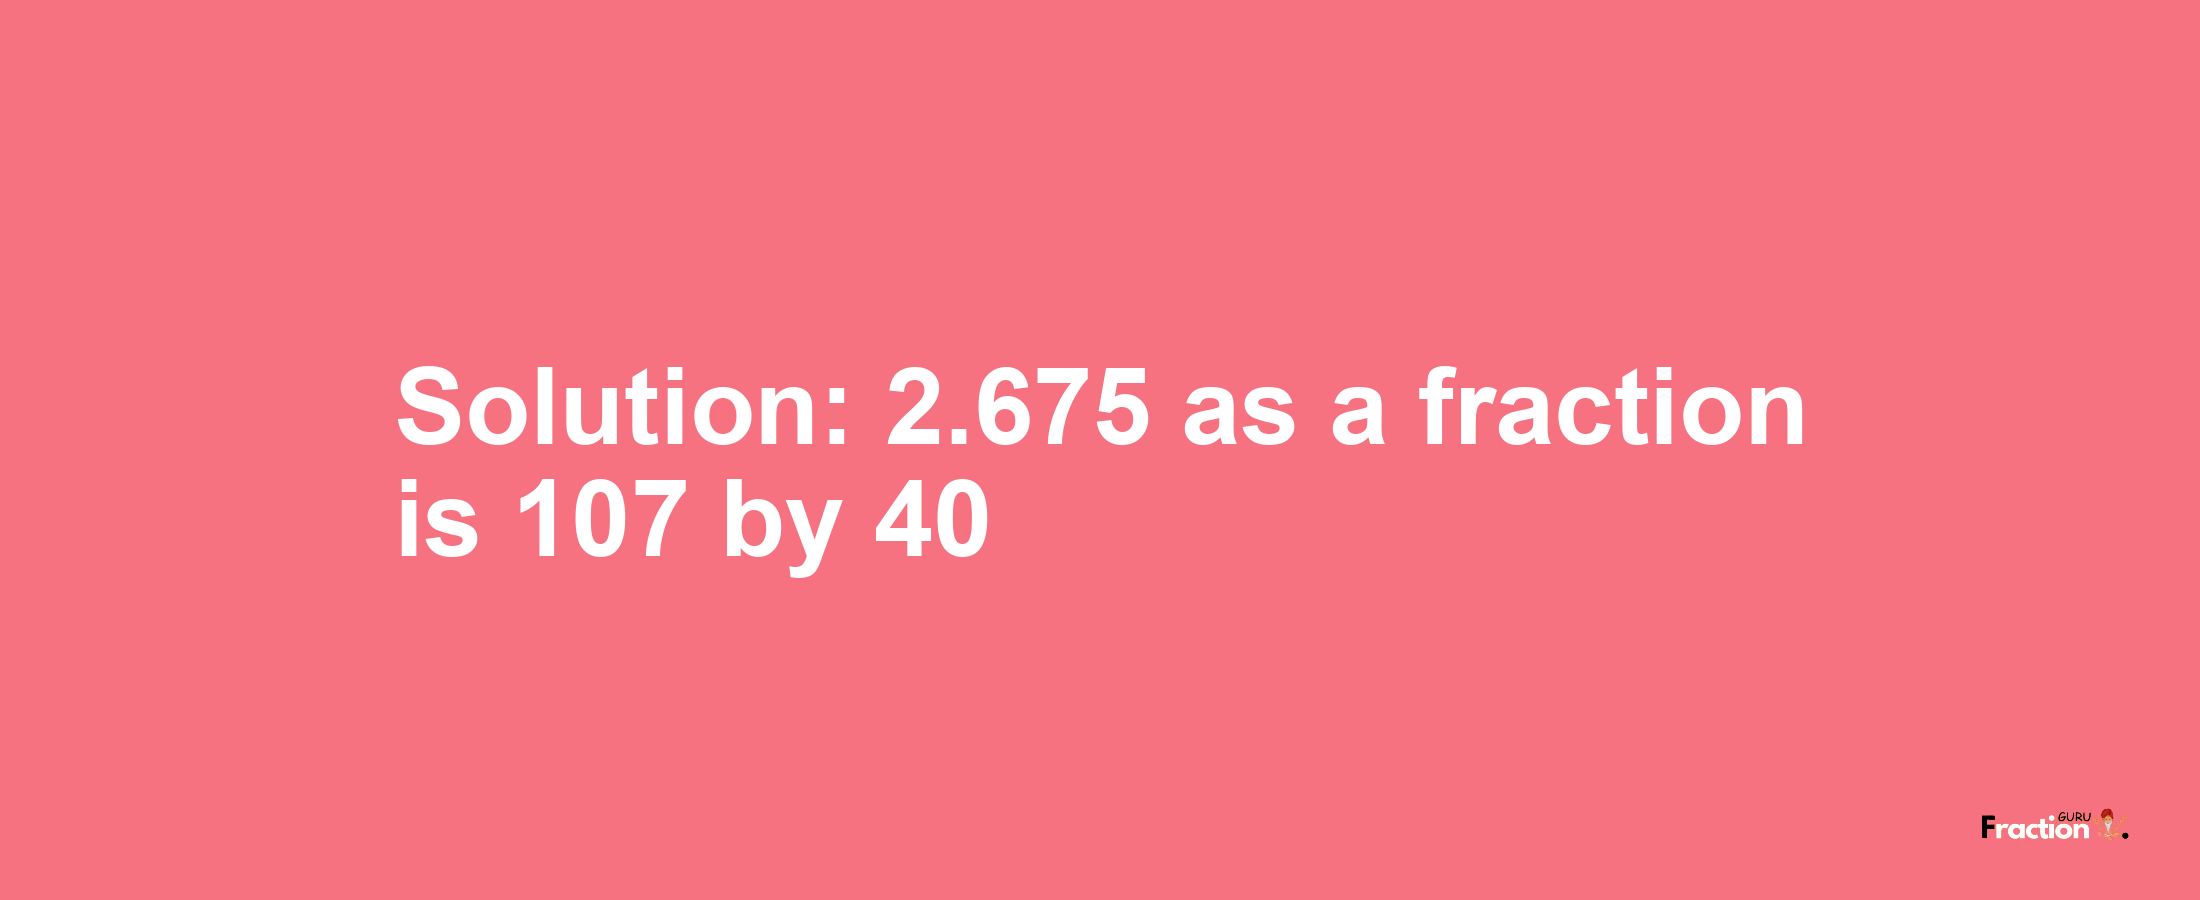 Solution:2.675 as a fraction is 107/40